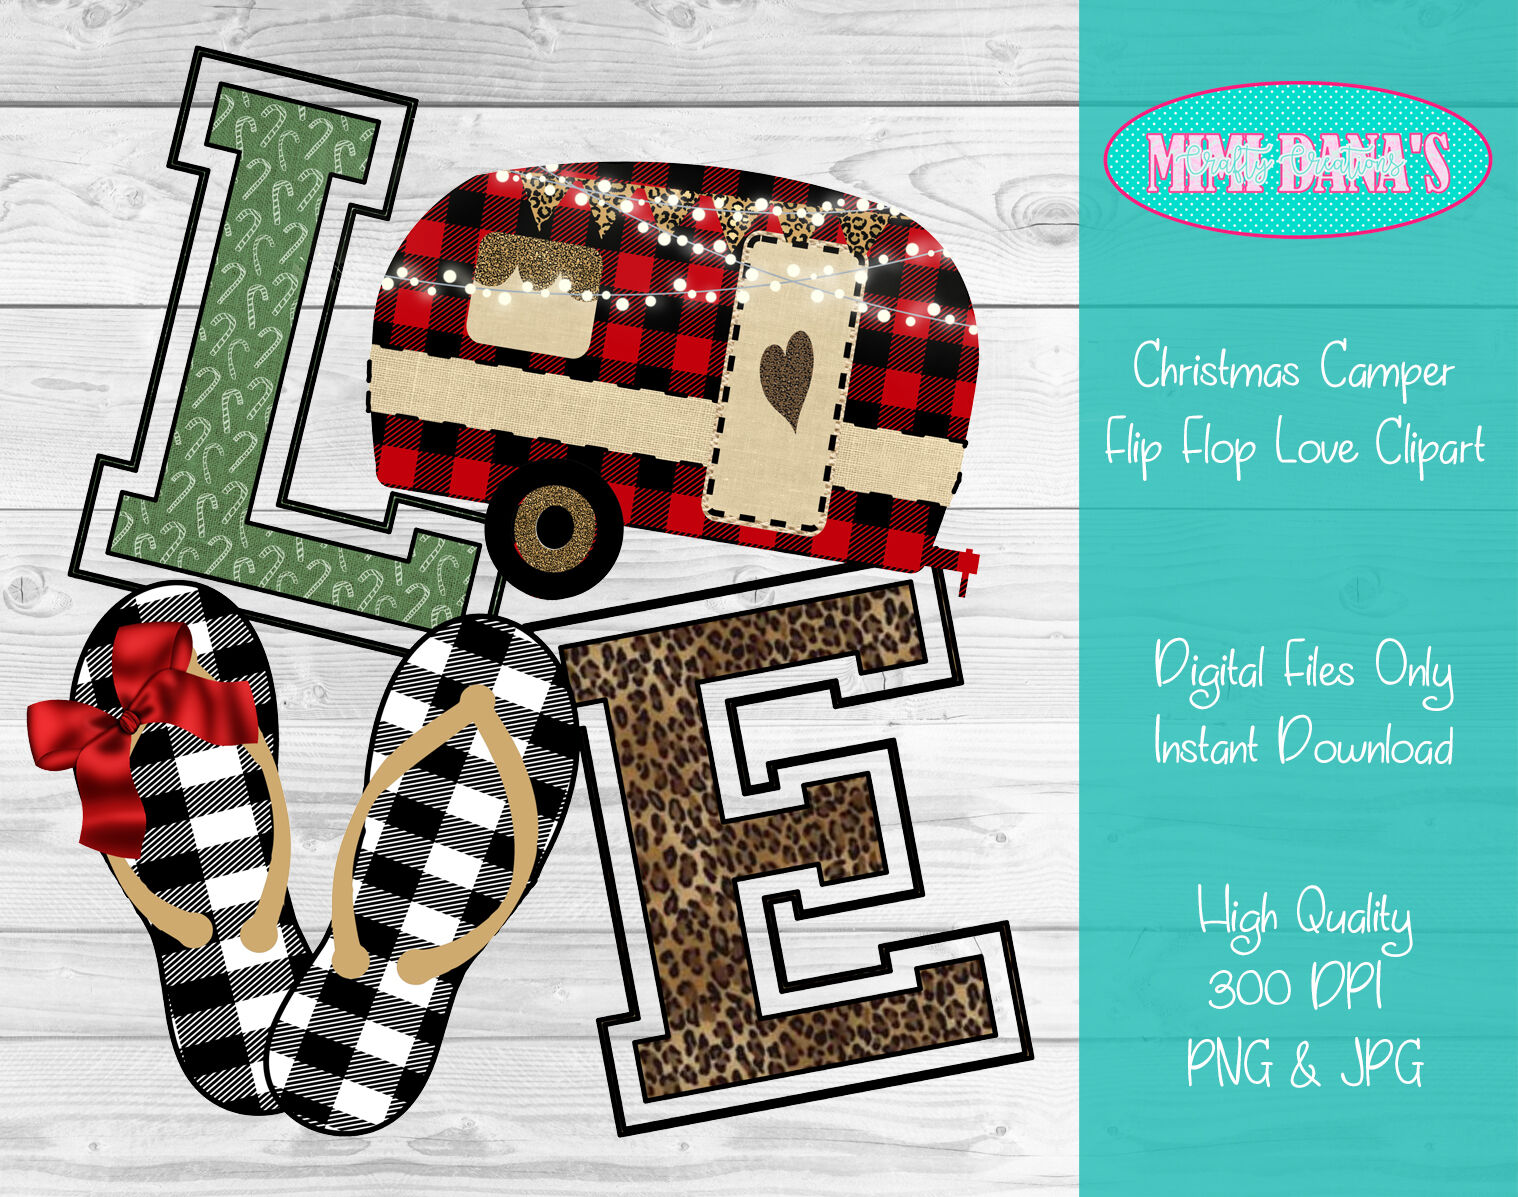 Download Christmas Camper Flip Flop Love Clipart By Mimi Dana S Crafty Creations Thehungryjpeg Com